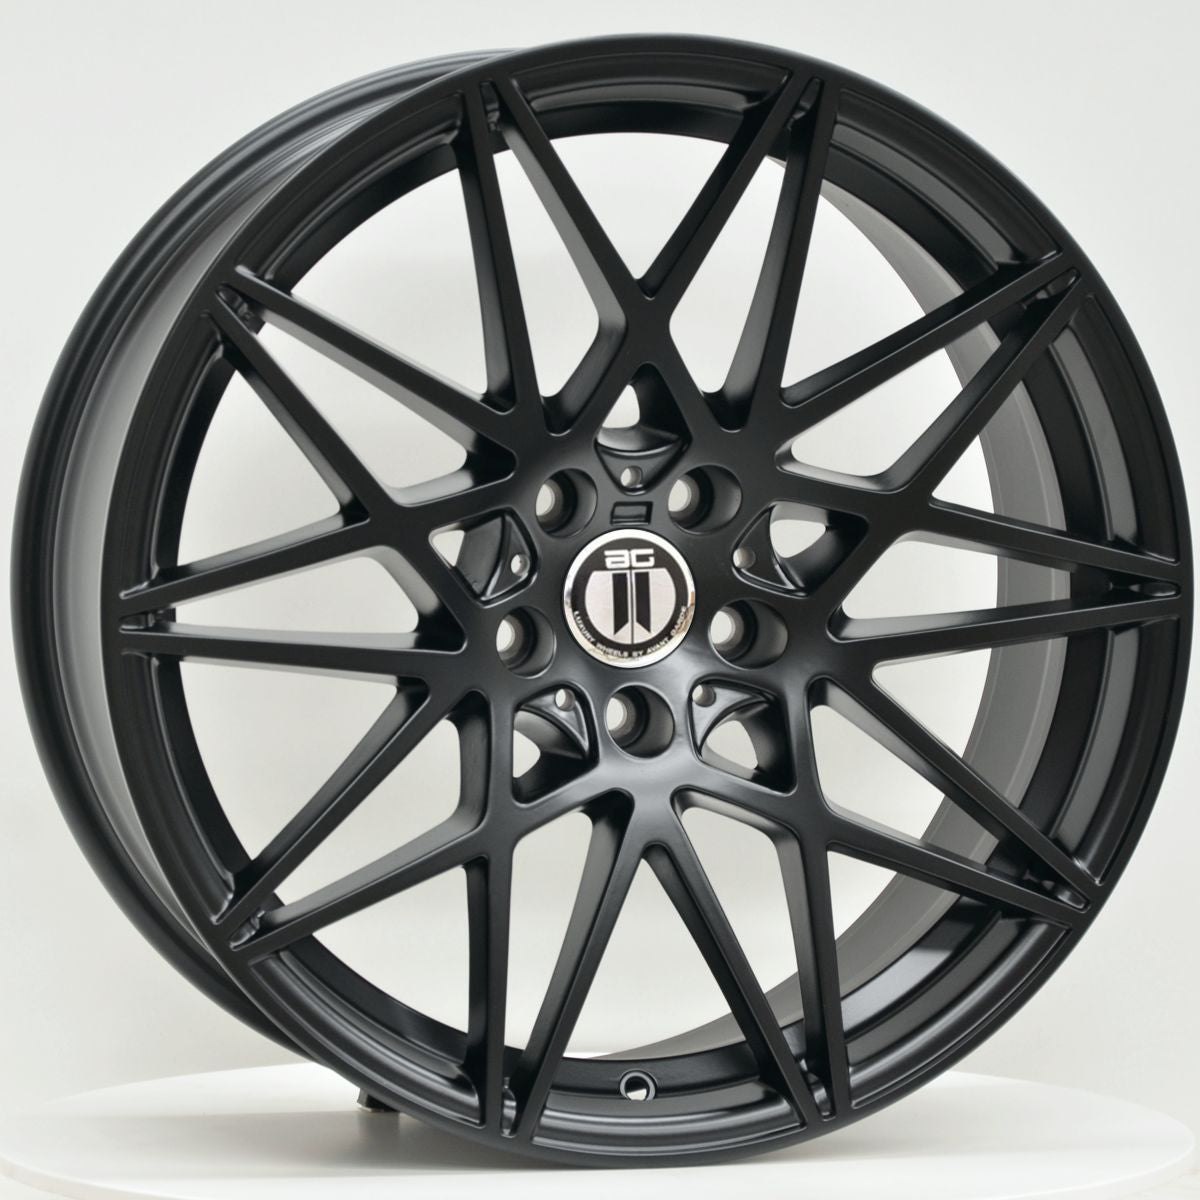 Load image into Gallery viewer, GT 20 Inch Staggered M3/M4 F80/F82/F83 Satin Black
